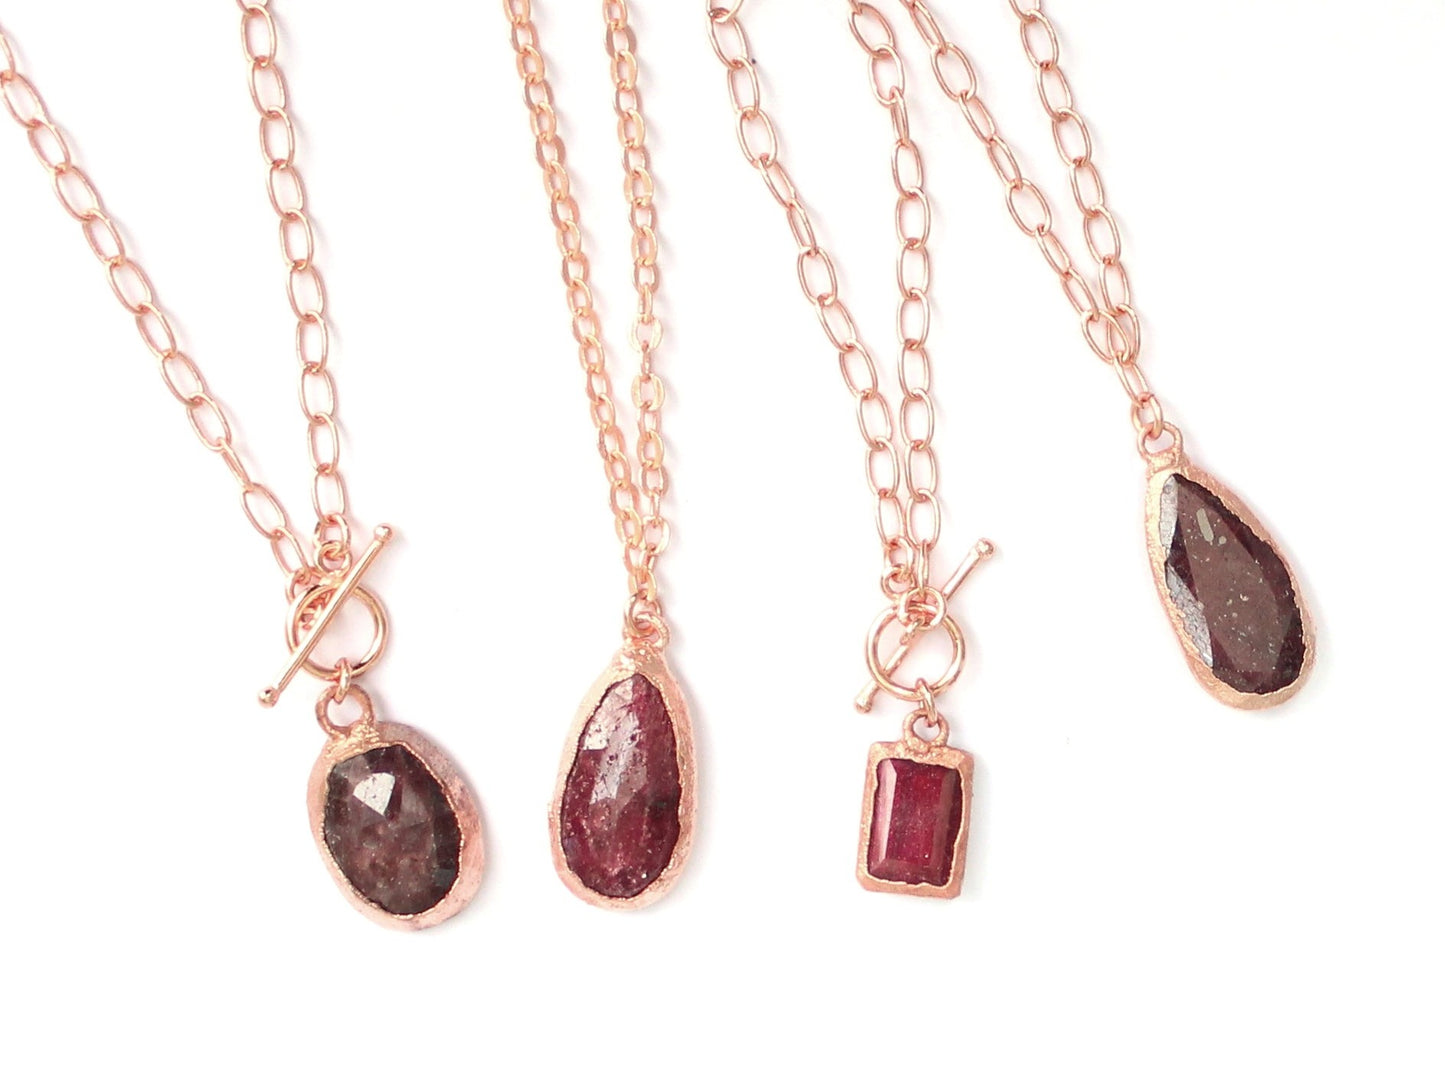 Pear Ruby pendant on oval link chain